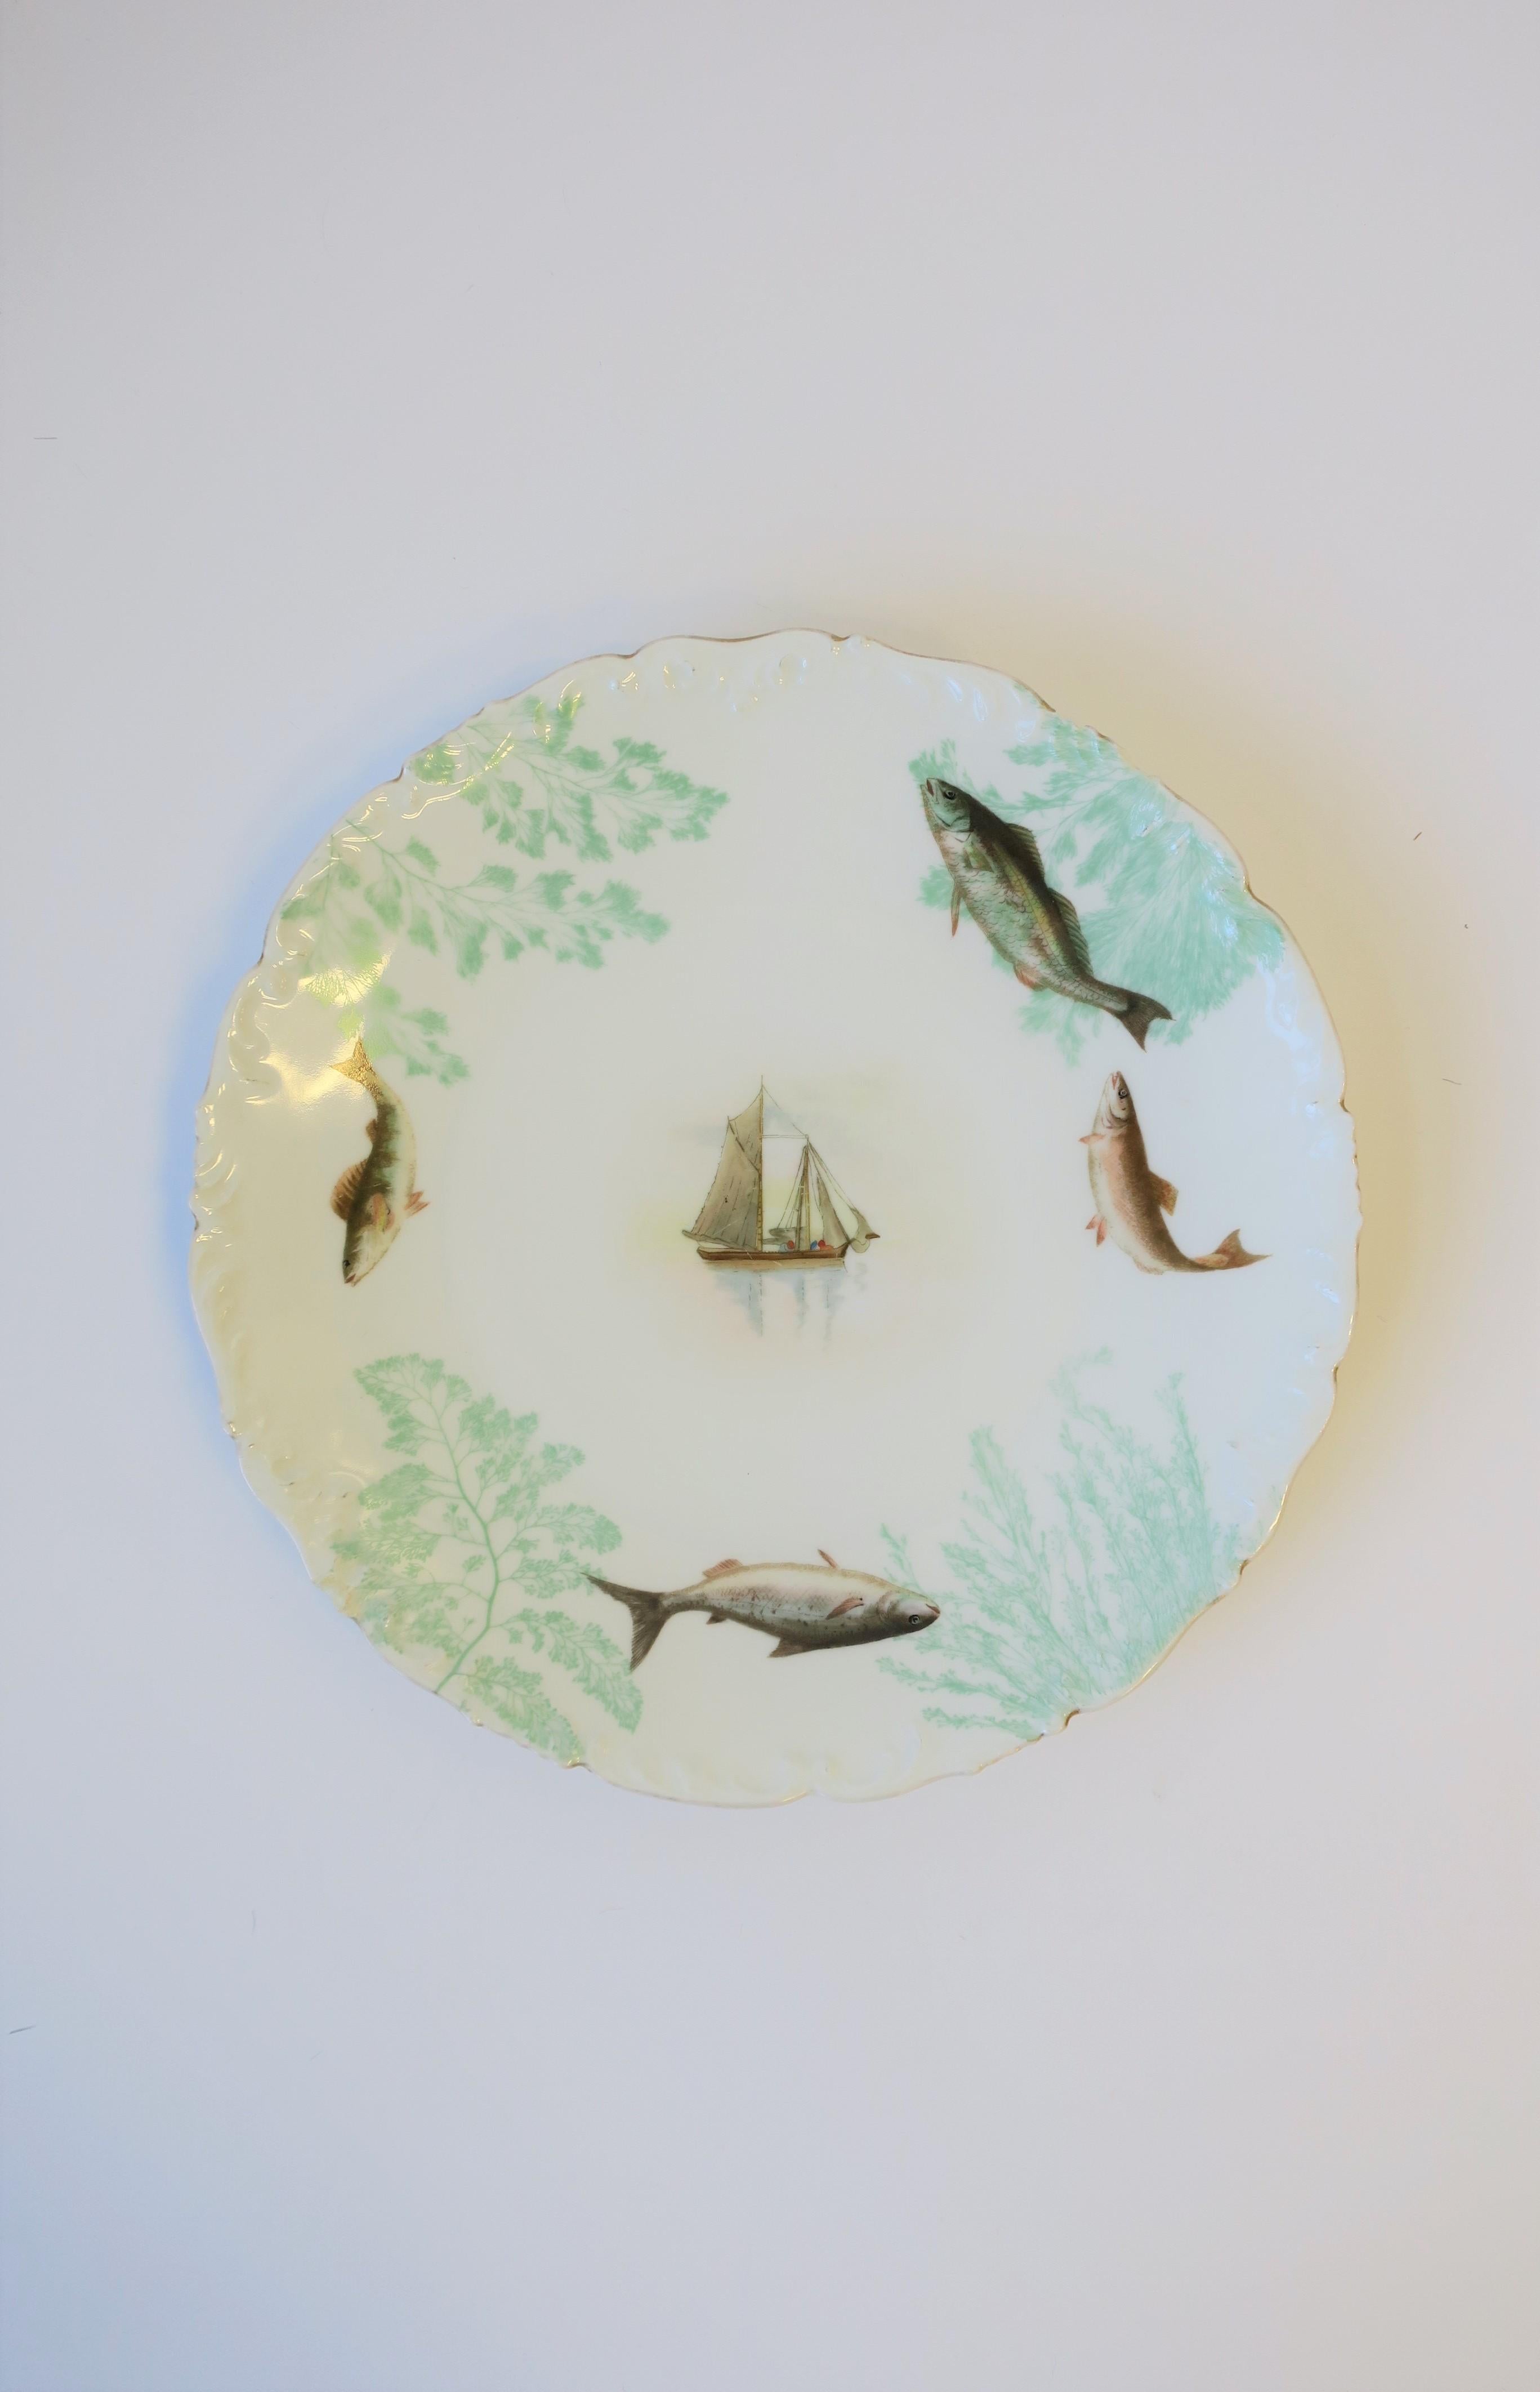 French Limoges Porcelain Dinner Plates with Rustic Fish & Boat Design, Set of 8 For Sale 4